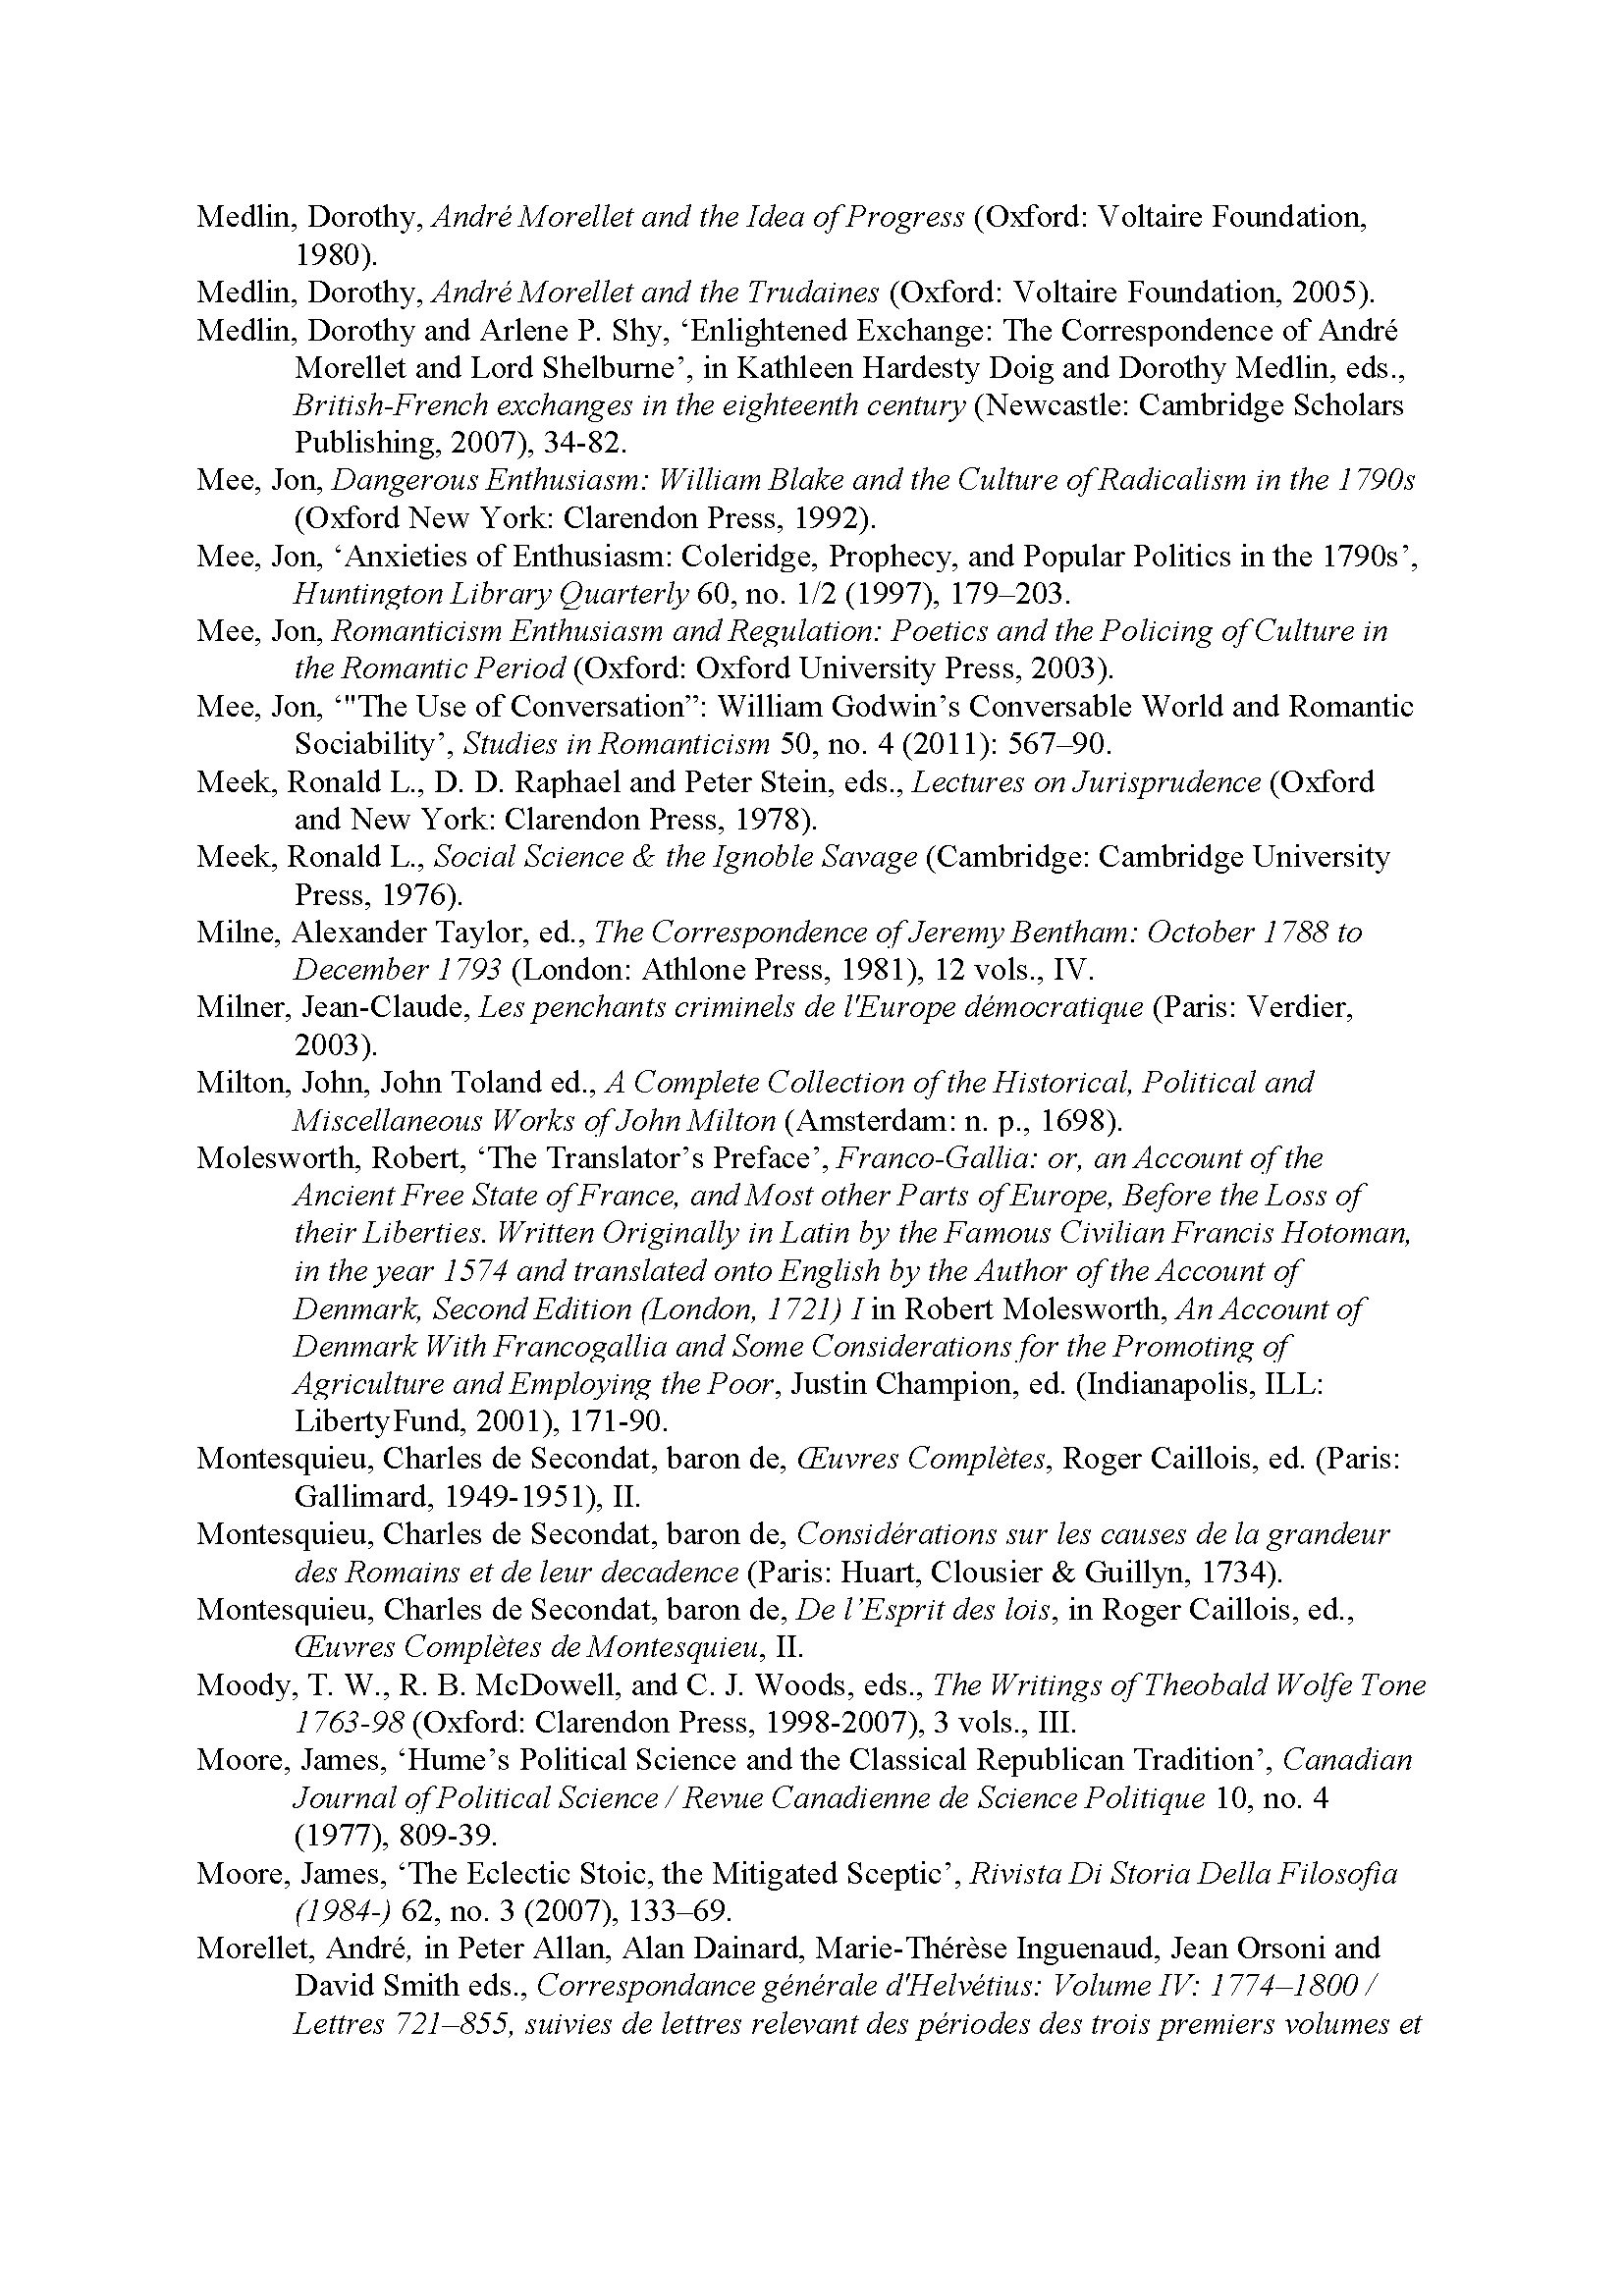 End of the Enlightment_Bibliography[25]_Page_31.jpg